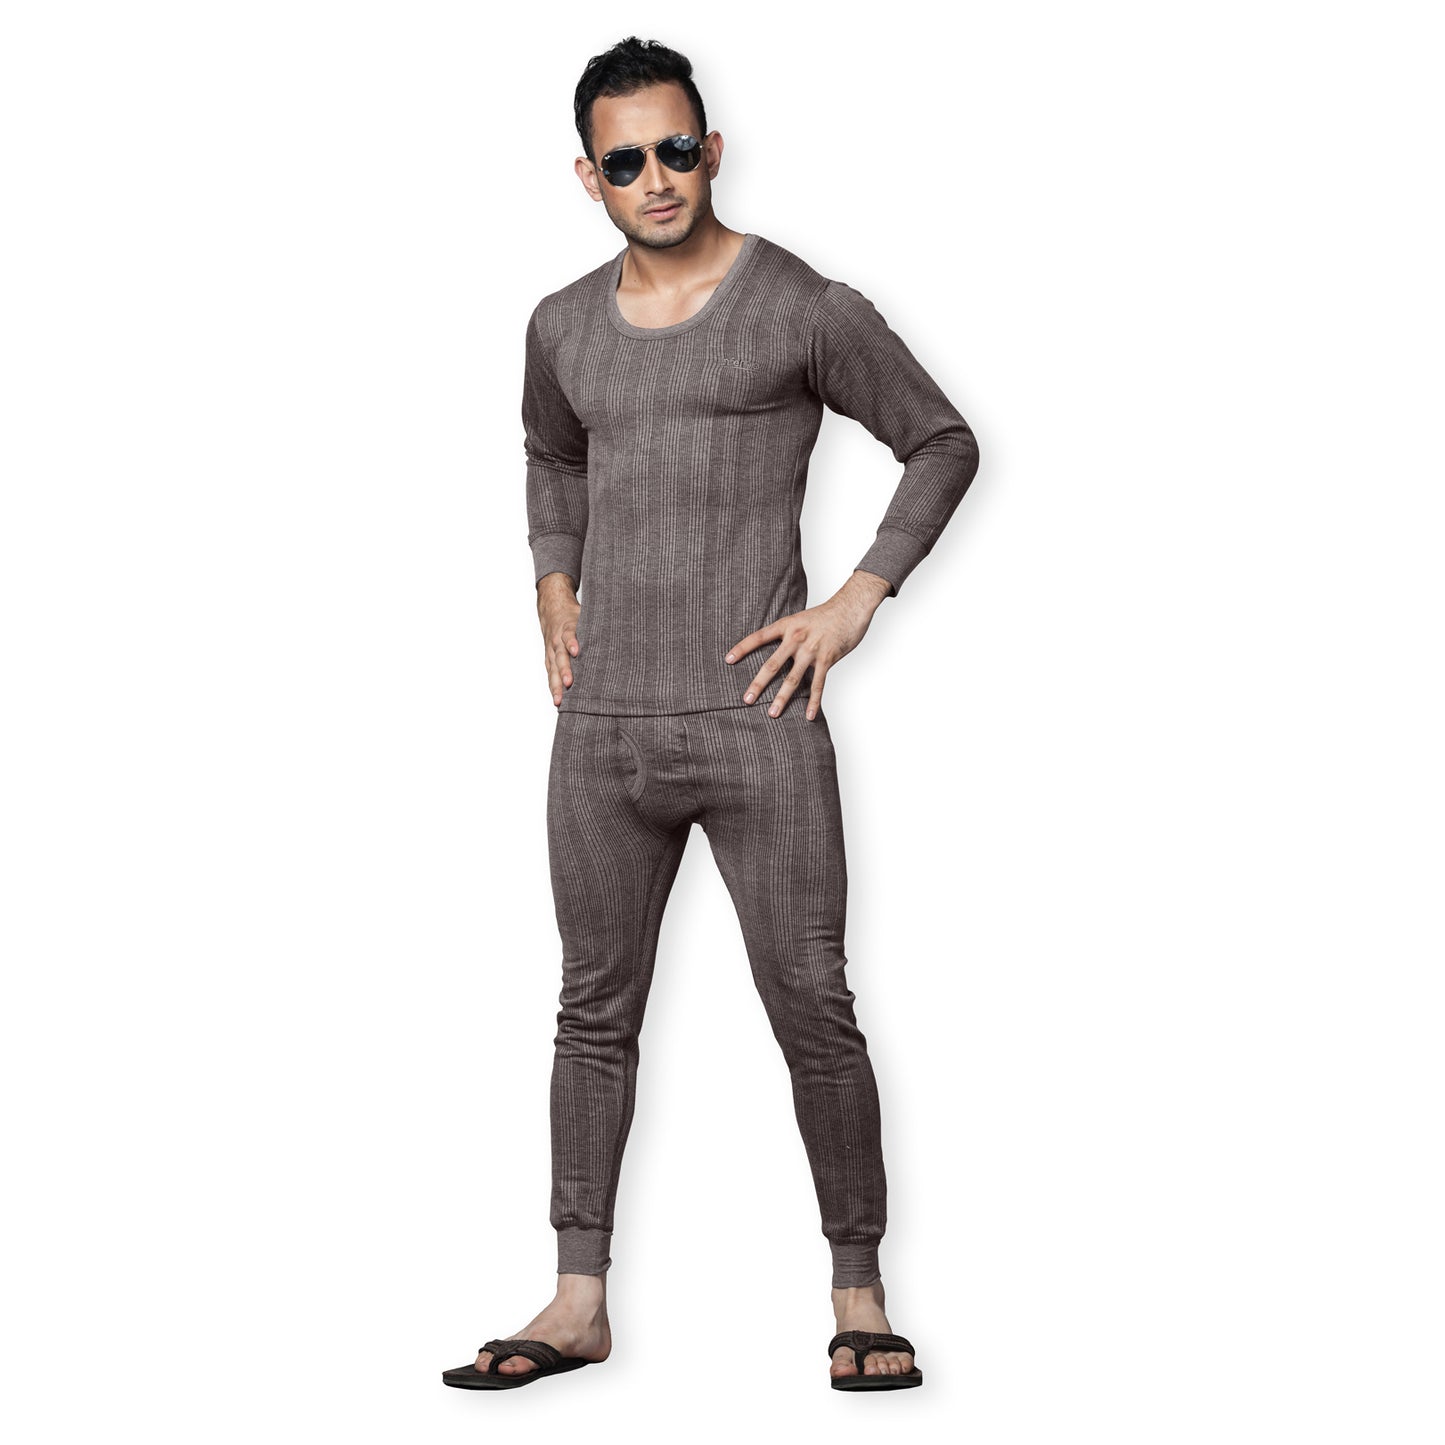 Sirtex Eazy Swelter Men's 2-Piece Thermal Set